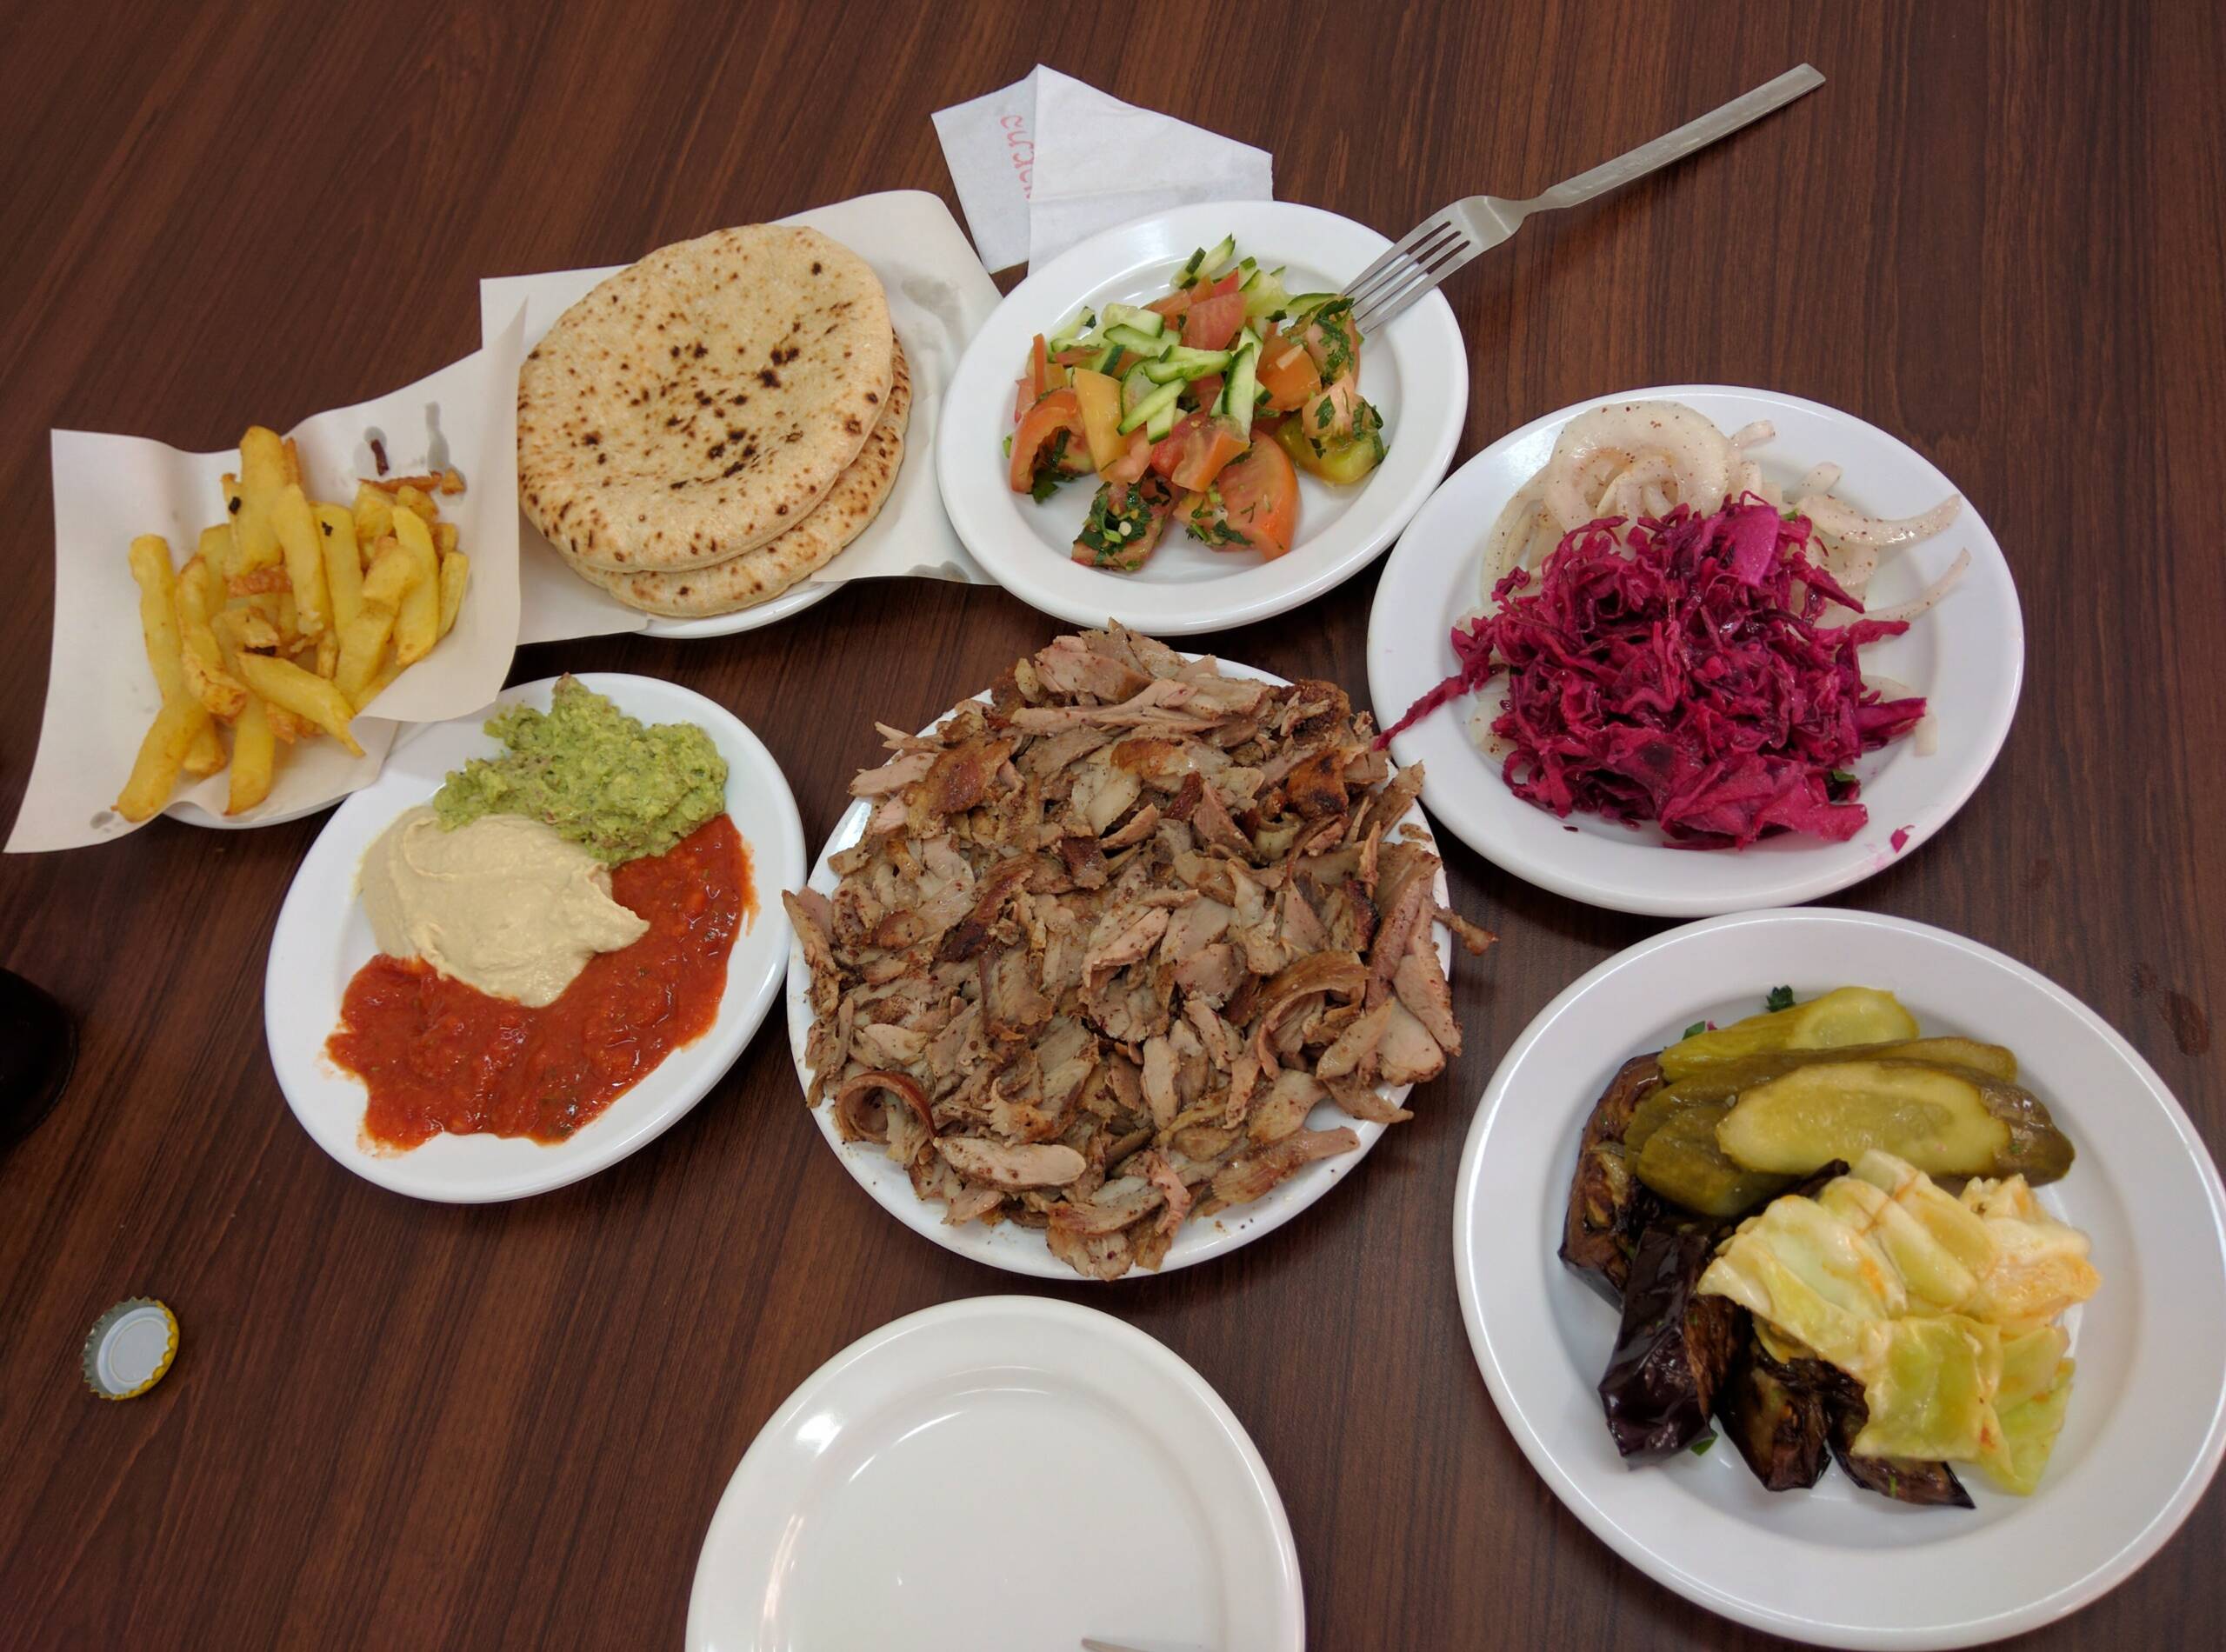 The beauty of Middle Eastern cuisine